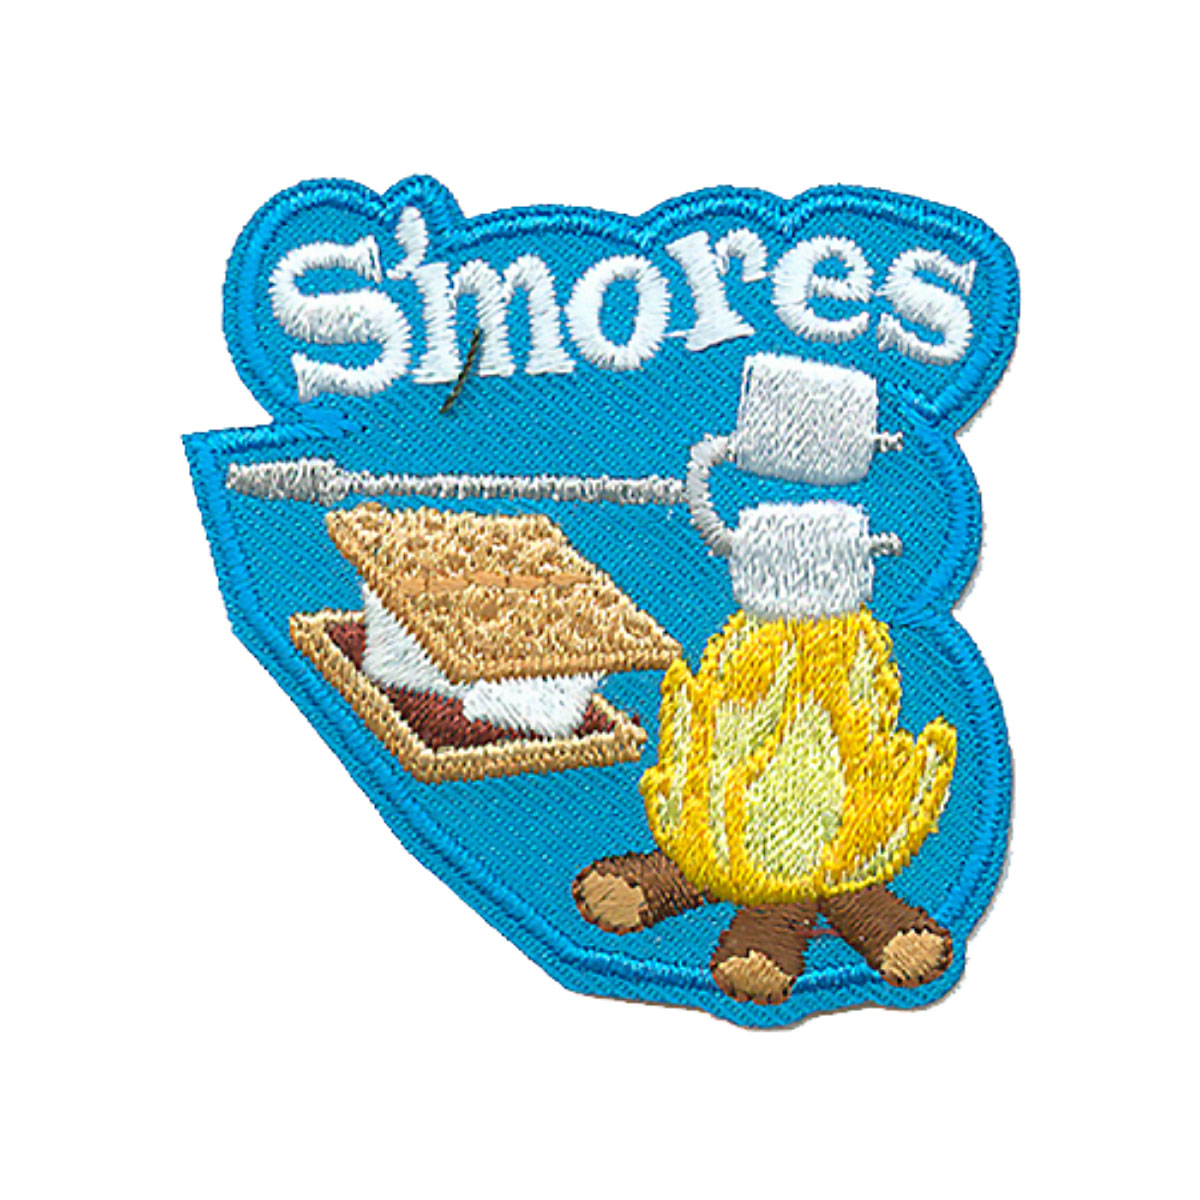 S'mores - W 